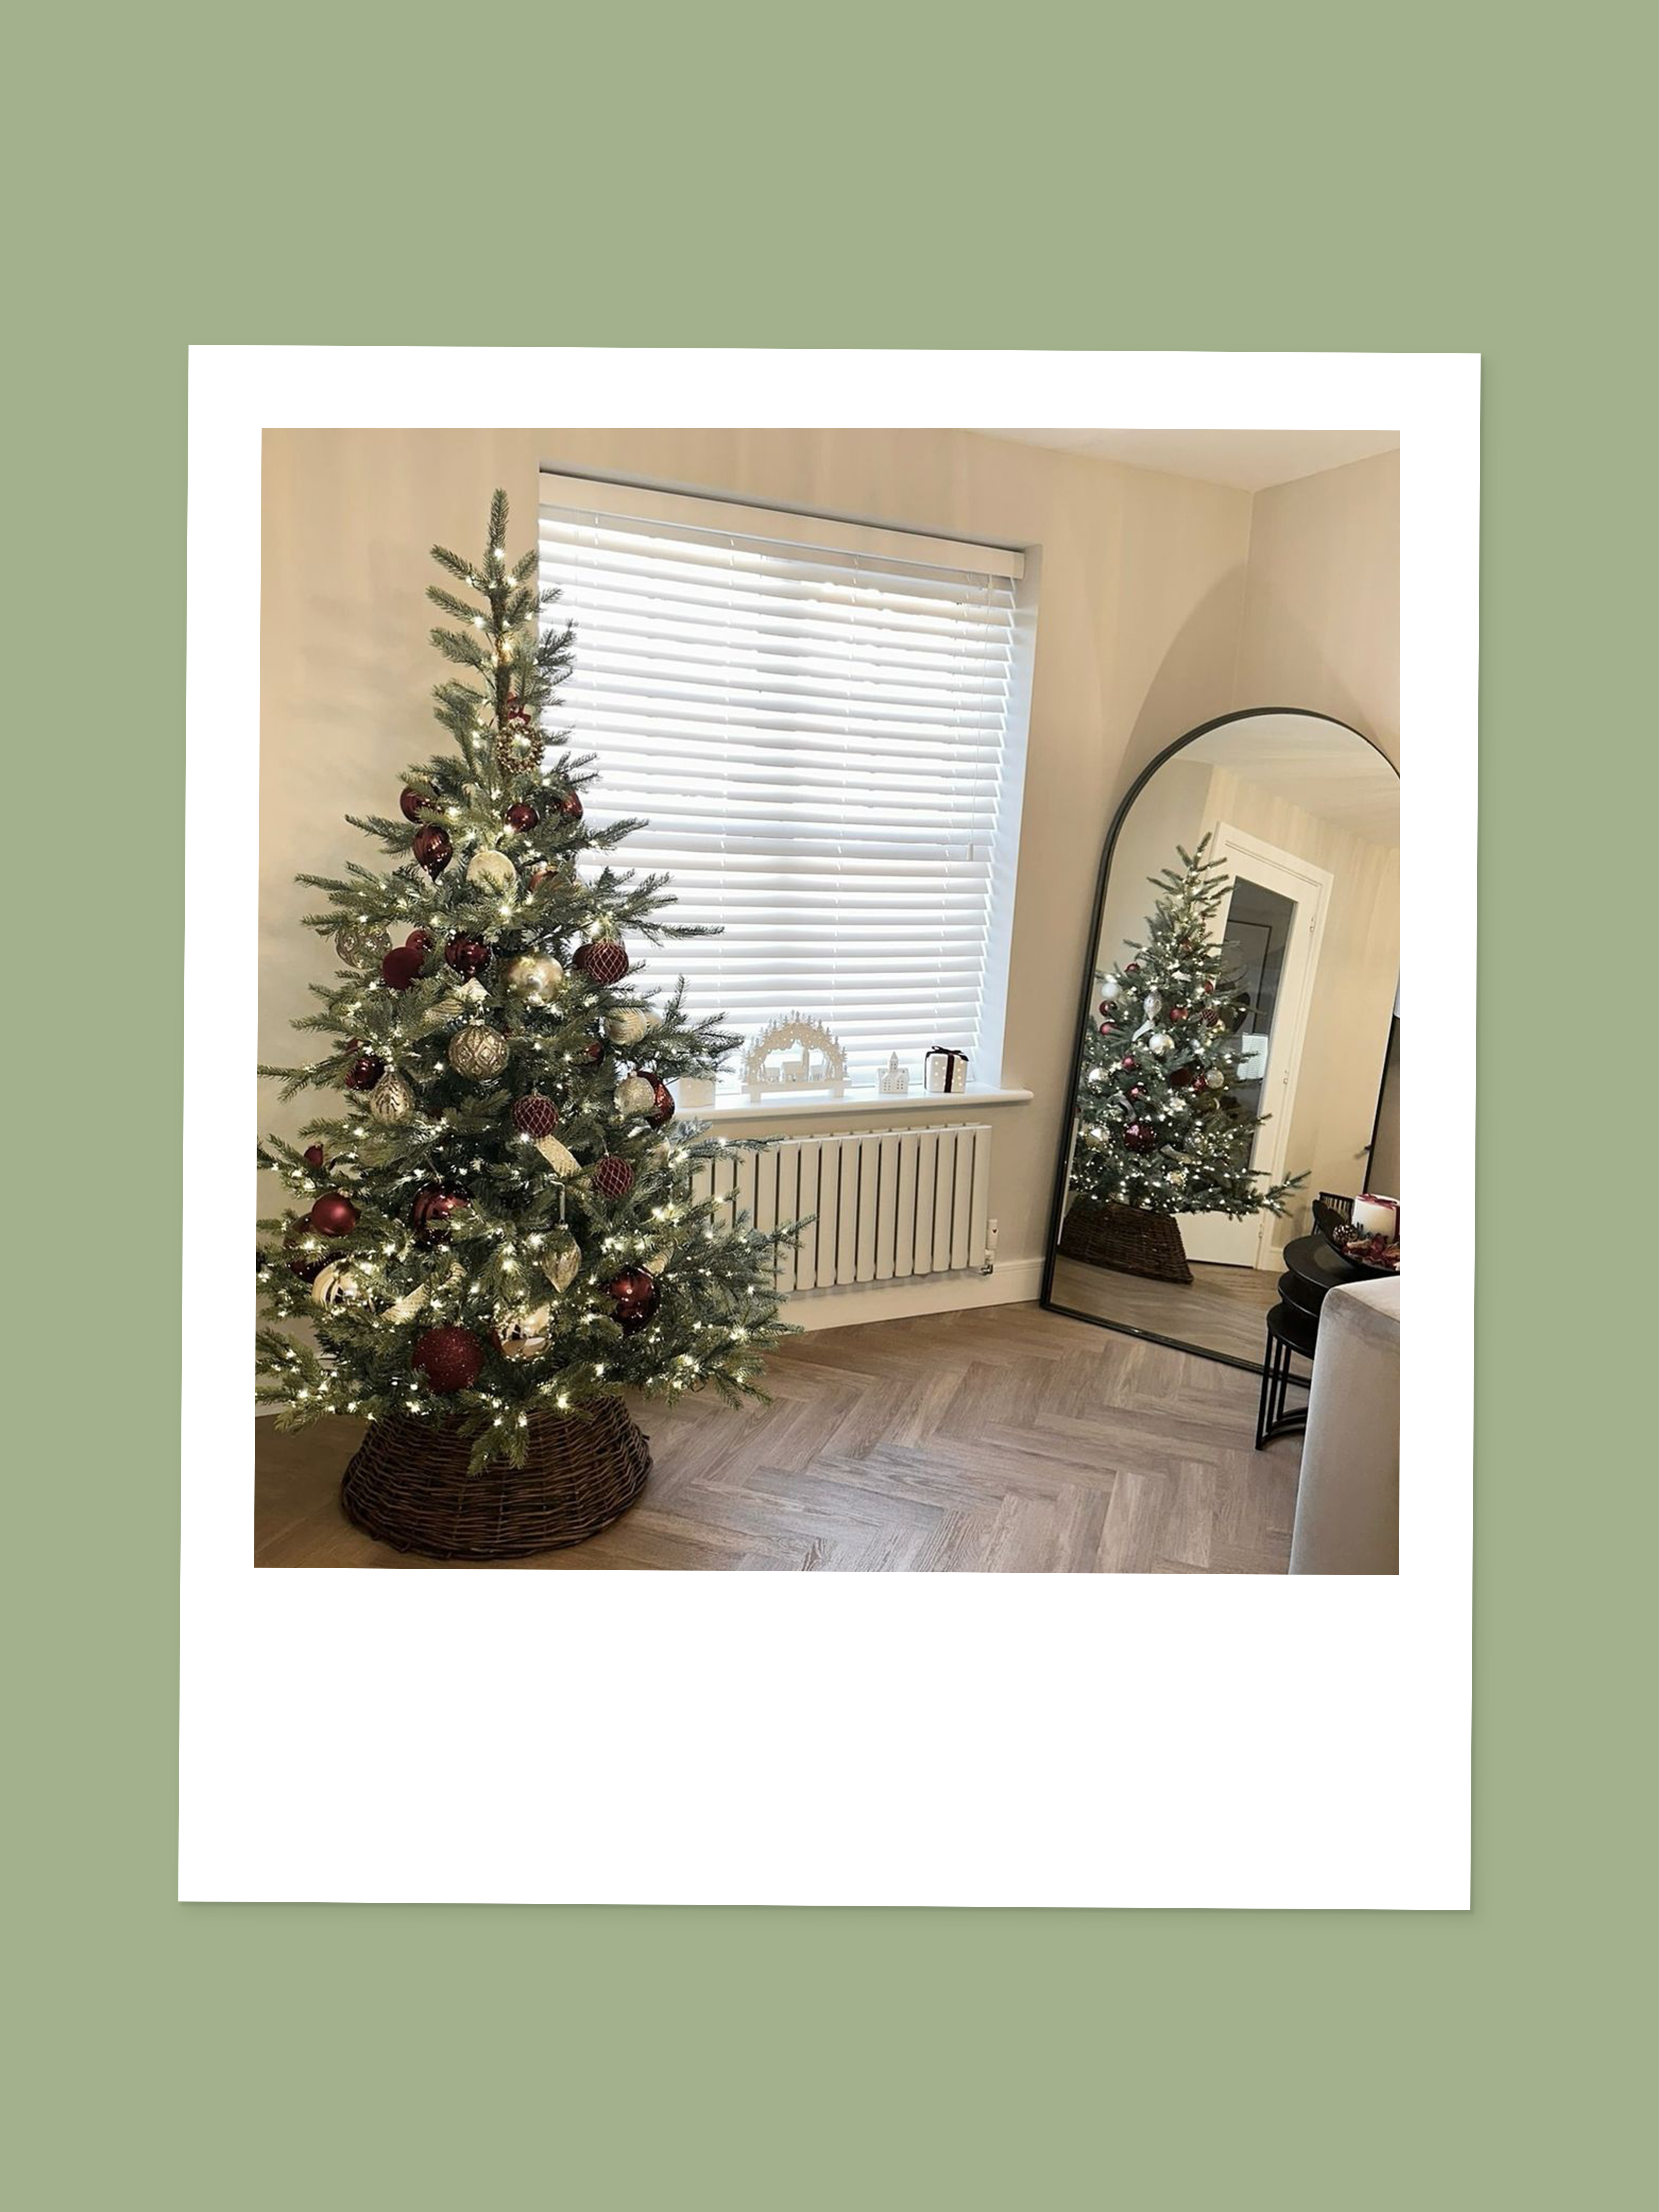 Polaroid image of a Christmas tree with red and white decorations and a brown tree skirt